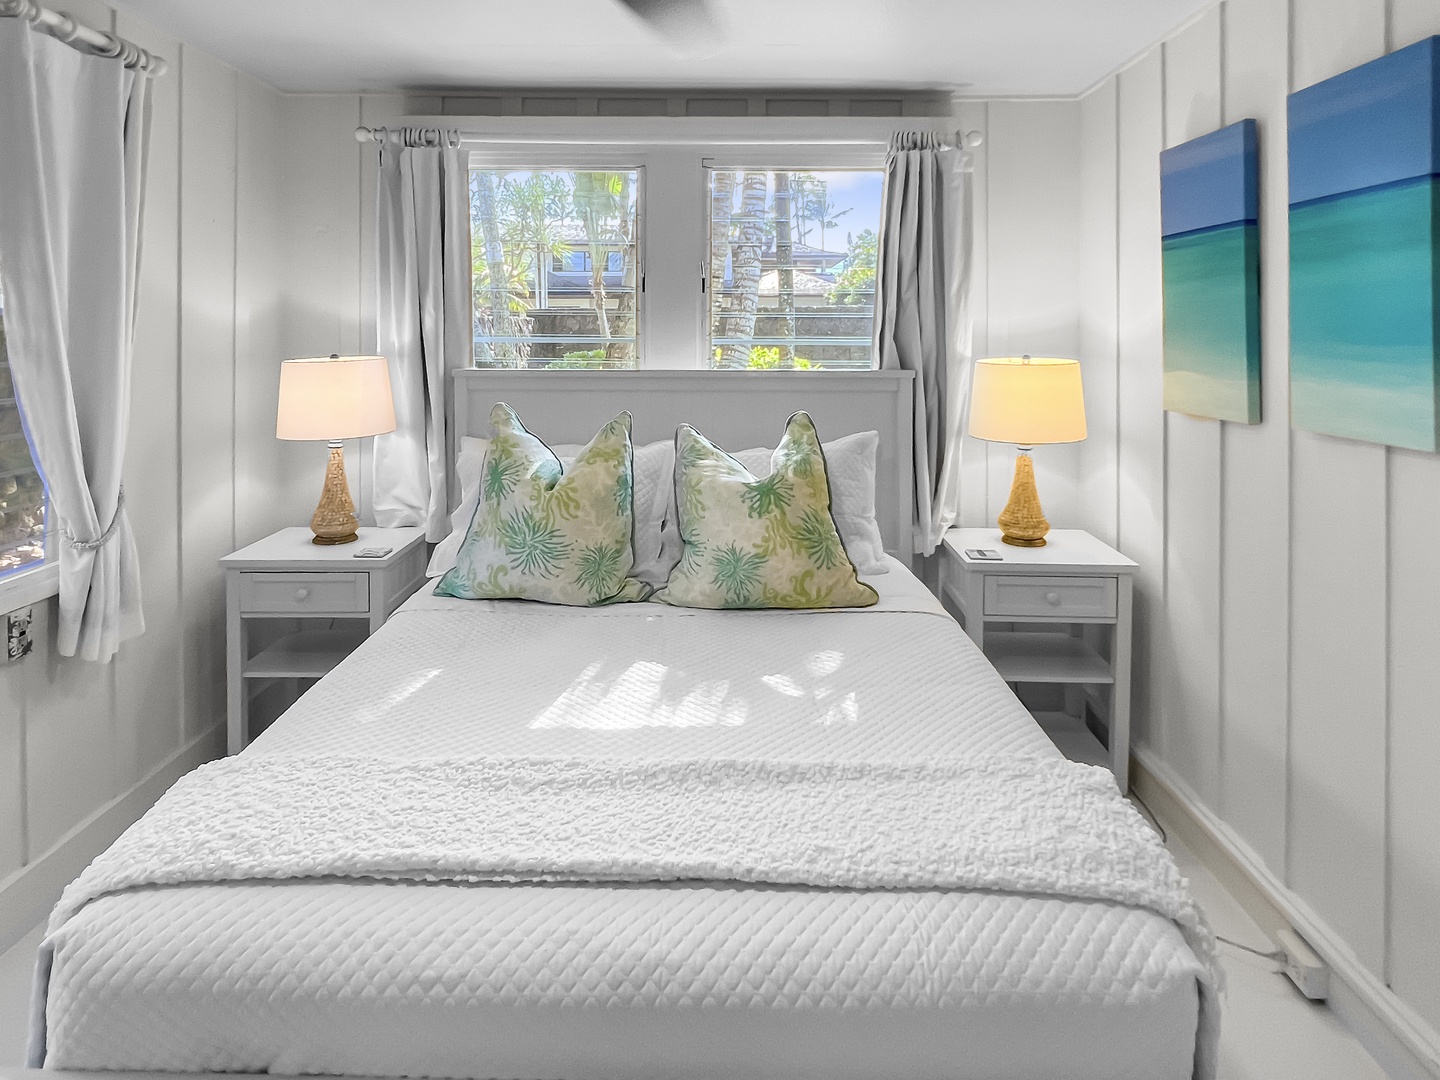 Kailua Vacation Rentals, Kai Mele - Guest Bedroom 2, Equipped with a queen bed and spit AC